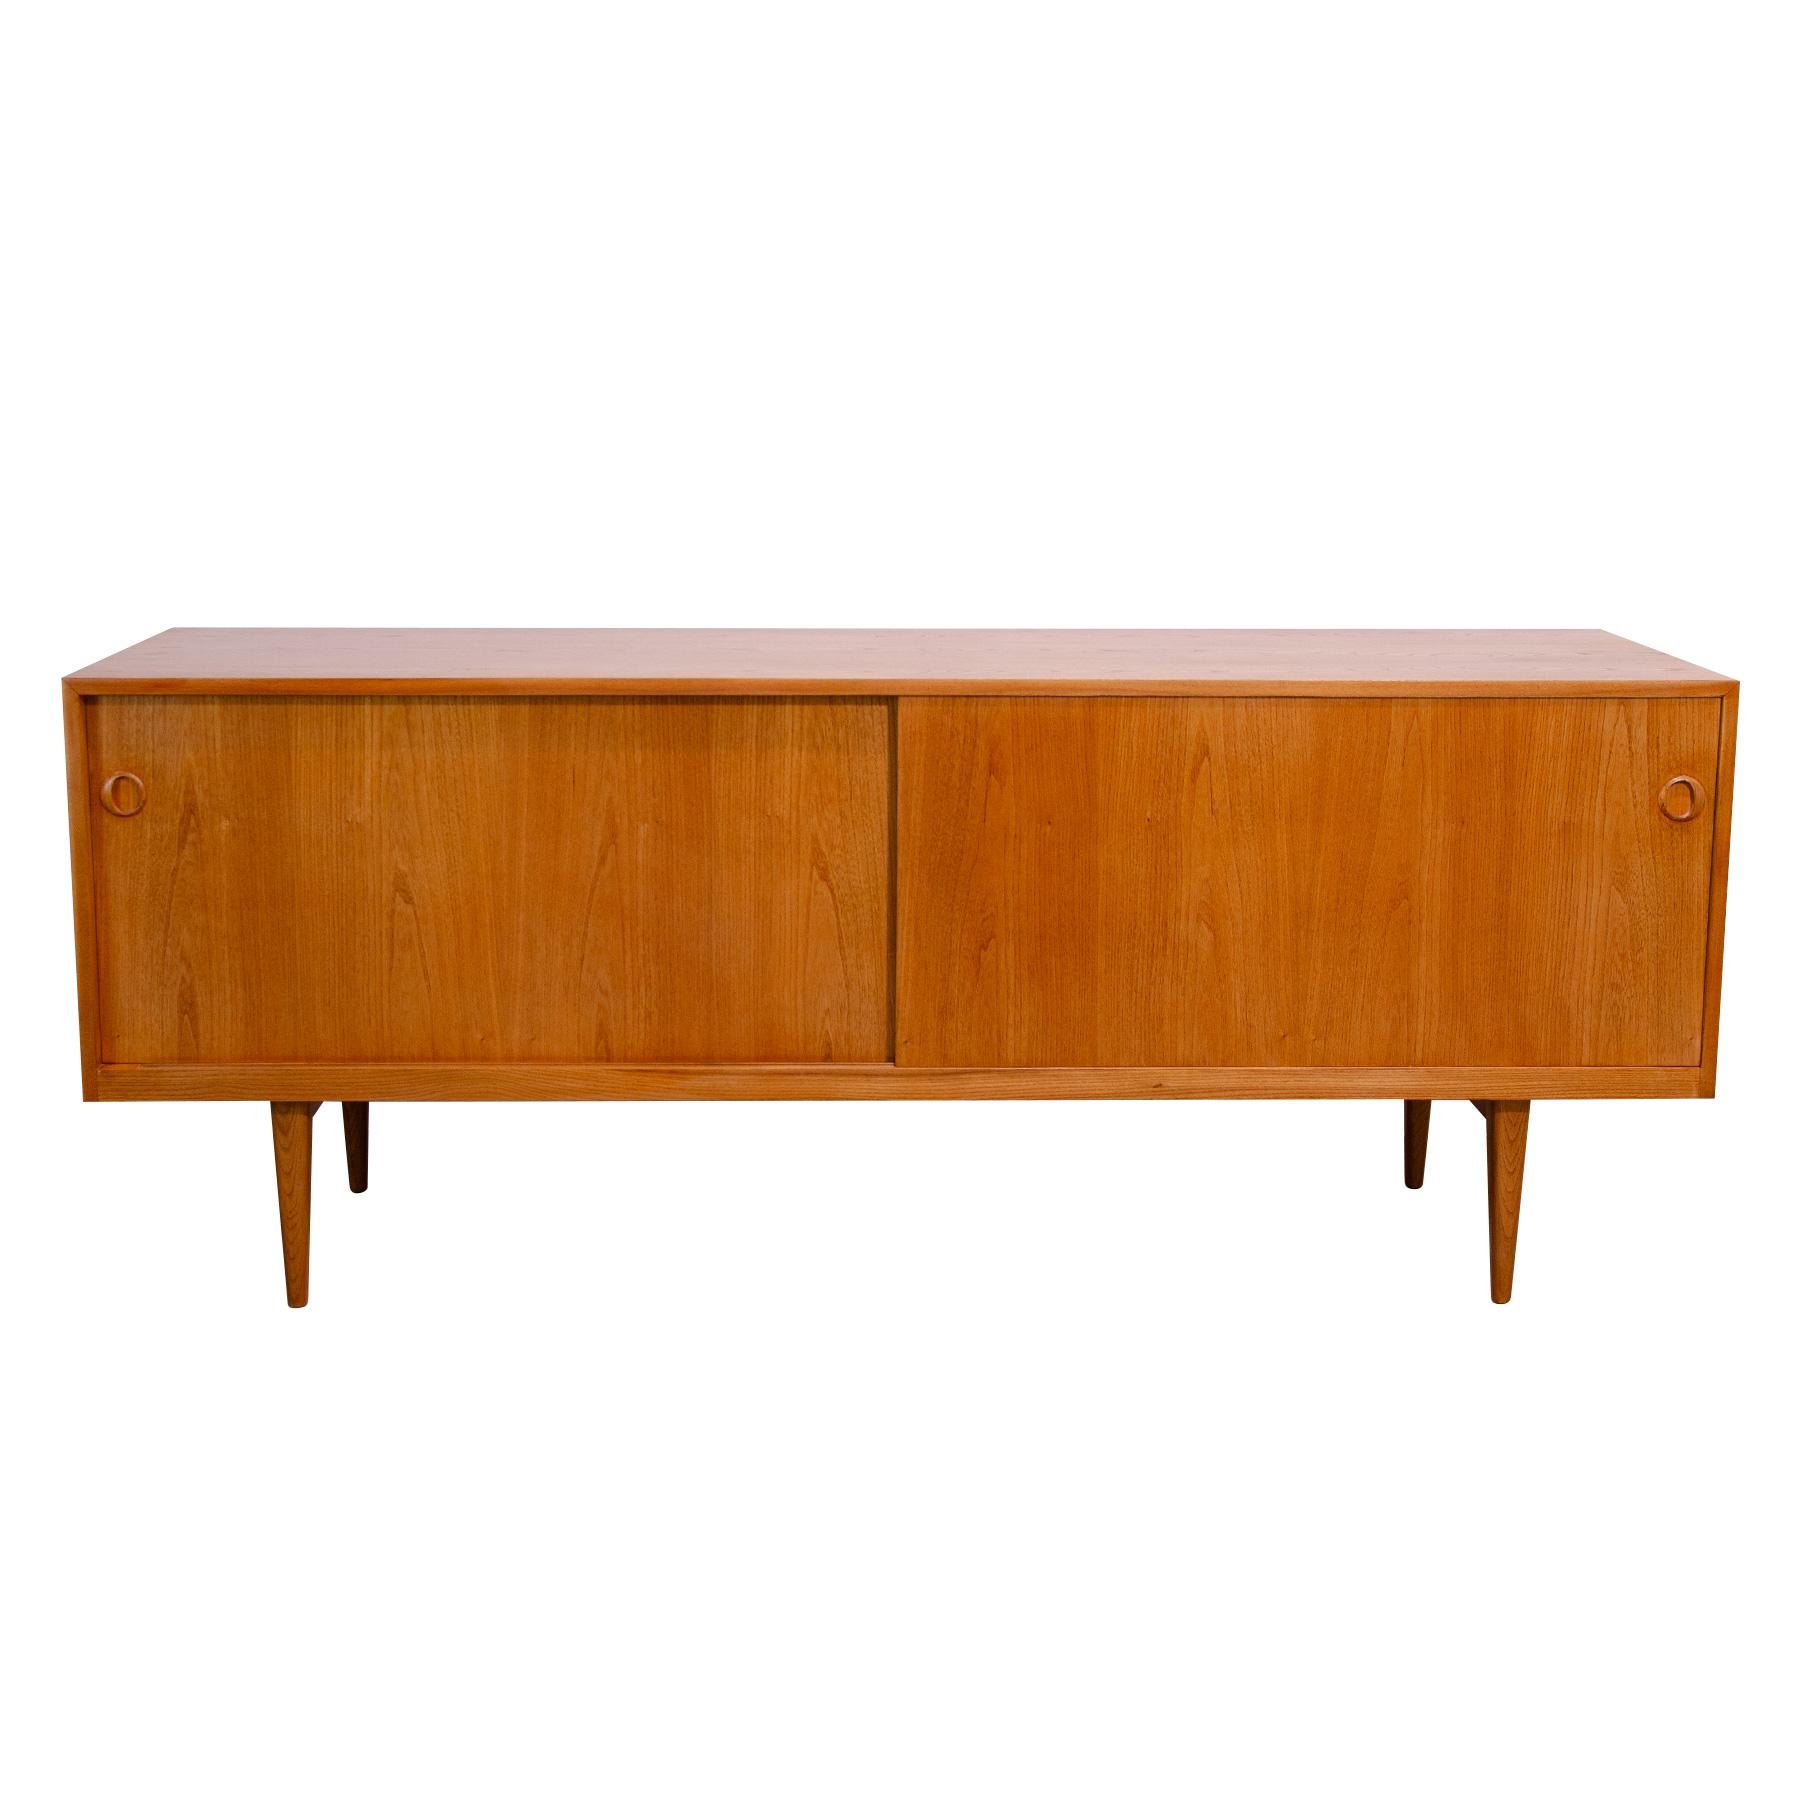 Mid century sideboard from the 1960´s. This sideboard is unique in that it has a two-sided opening.

This furniture were designed by Karel Vyčítal and Miloš Sedláček for Dřevotvar Jablonné nad Orlicí in the former Czechoslovakia. Miloš Sedláček and